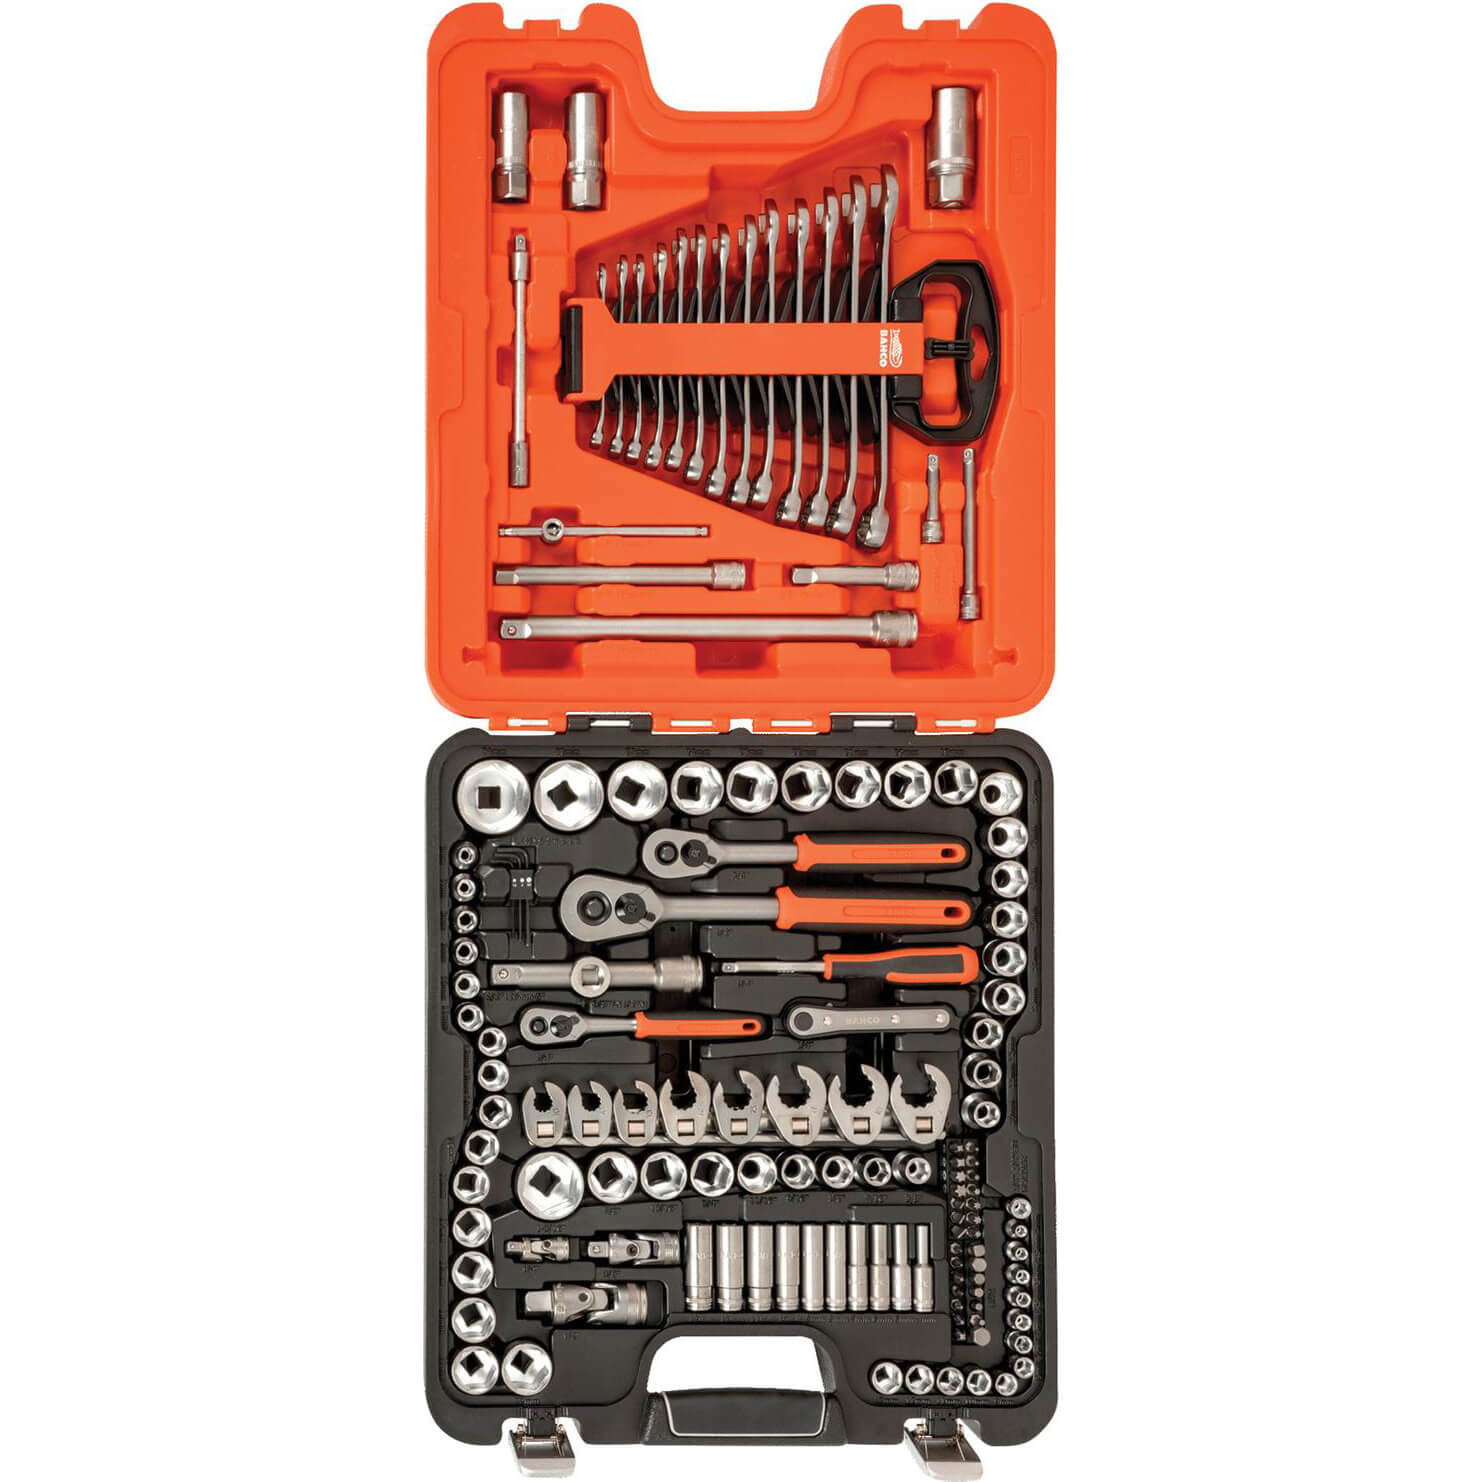 Image of Bahco 138 Piece Combination Drive Hex Socket, Screwdriver Bit and Crows Foot Spanner Set Metric Combination